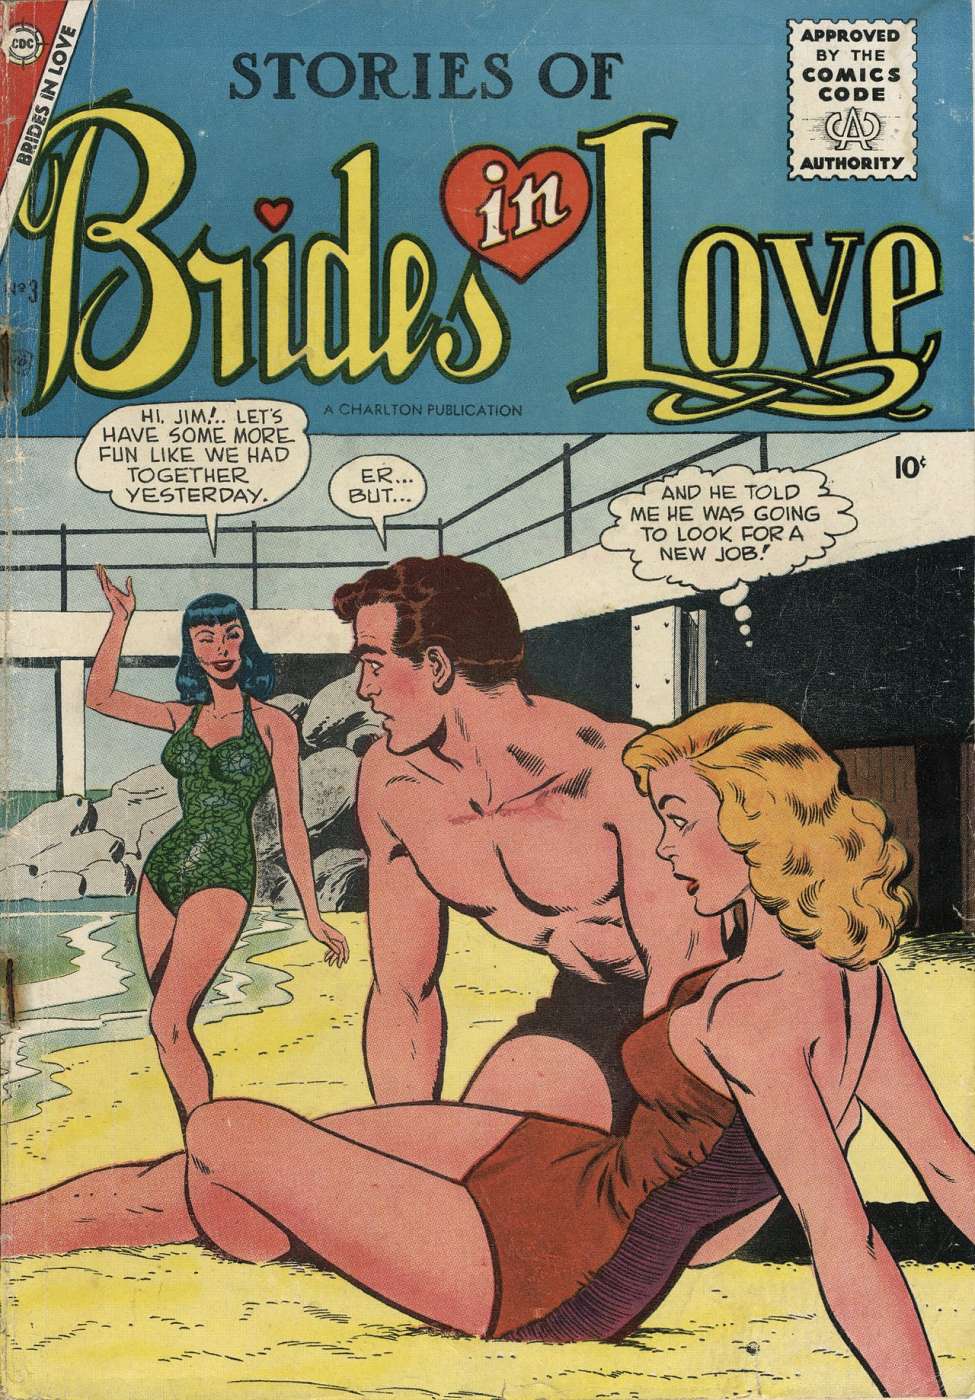 Book Cover For Brides in Love 3